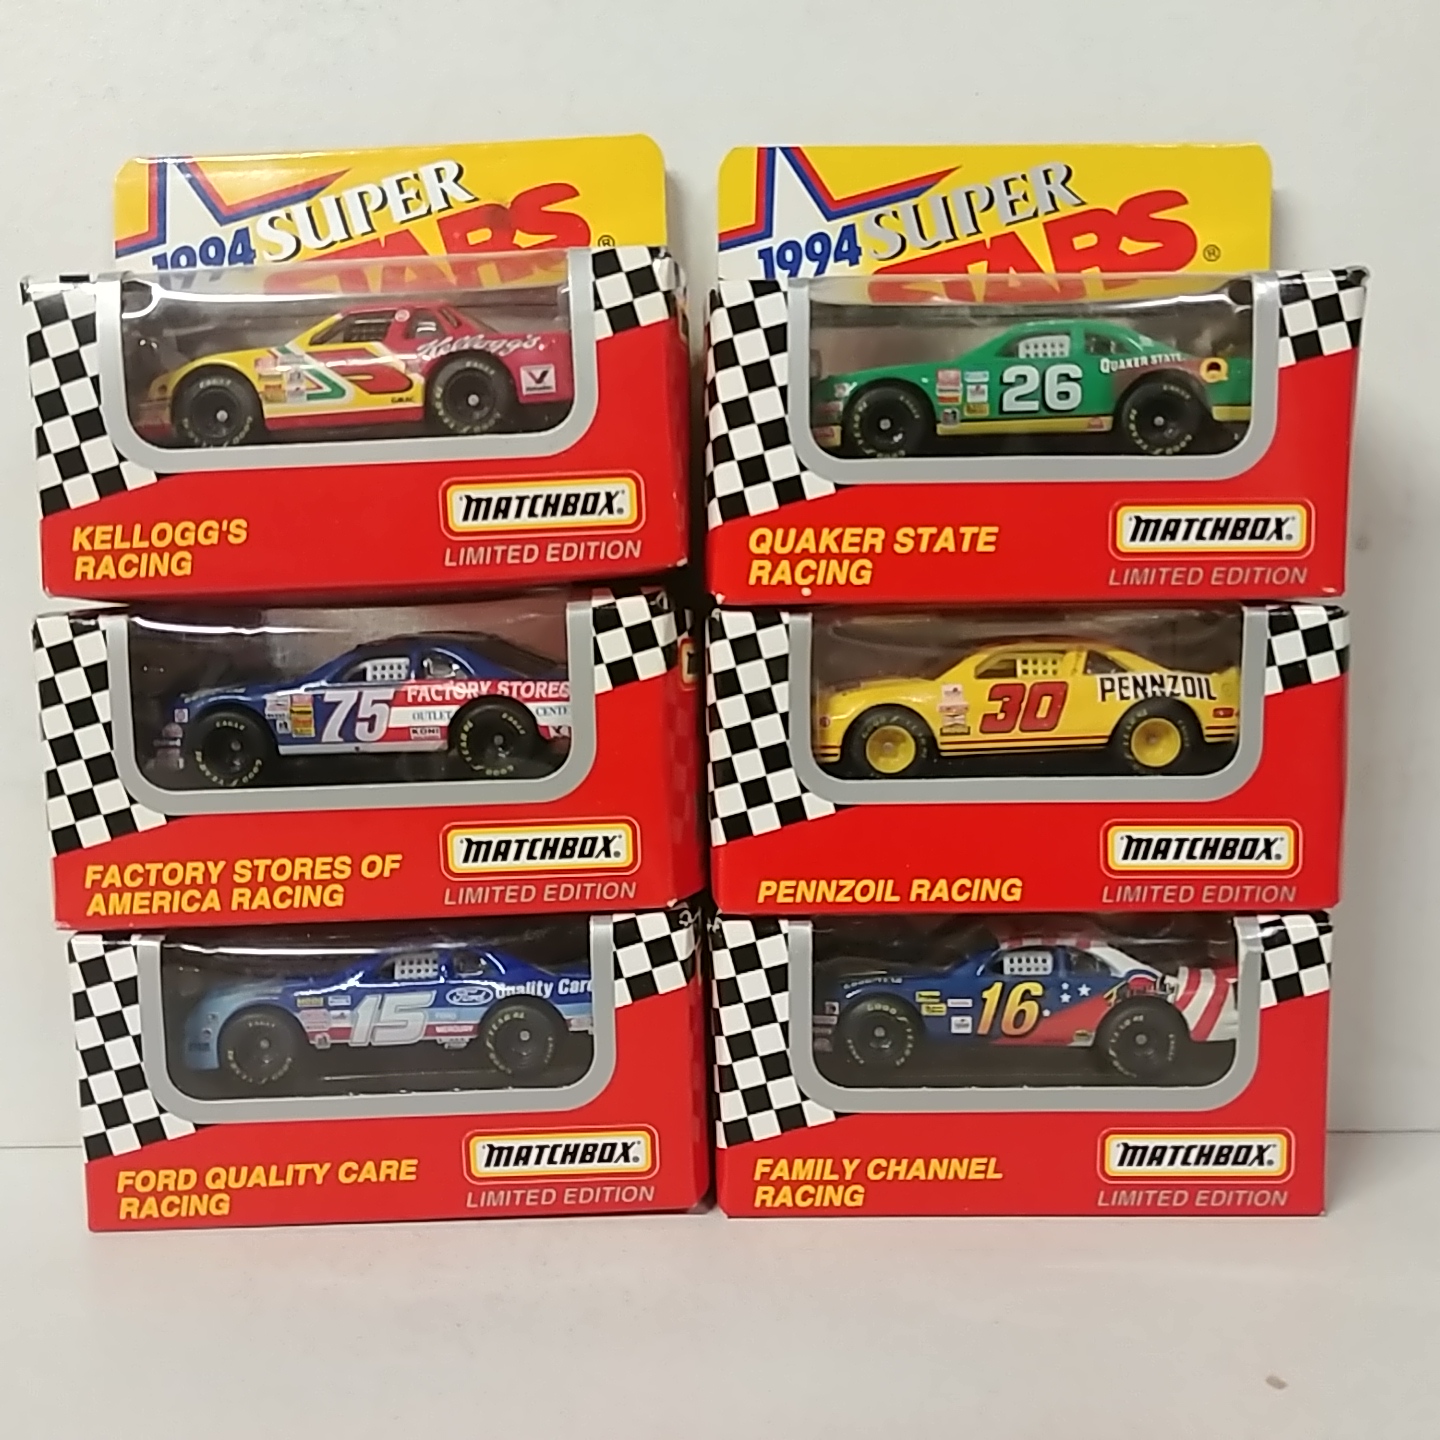 1994 White Rose Collectibles 1/64th Value Pack 05,15,16,26,30,75 cars